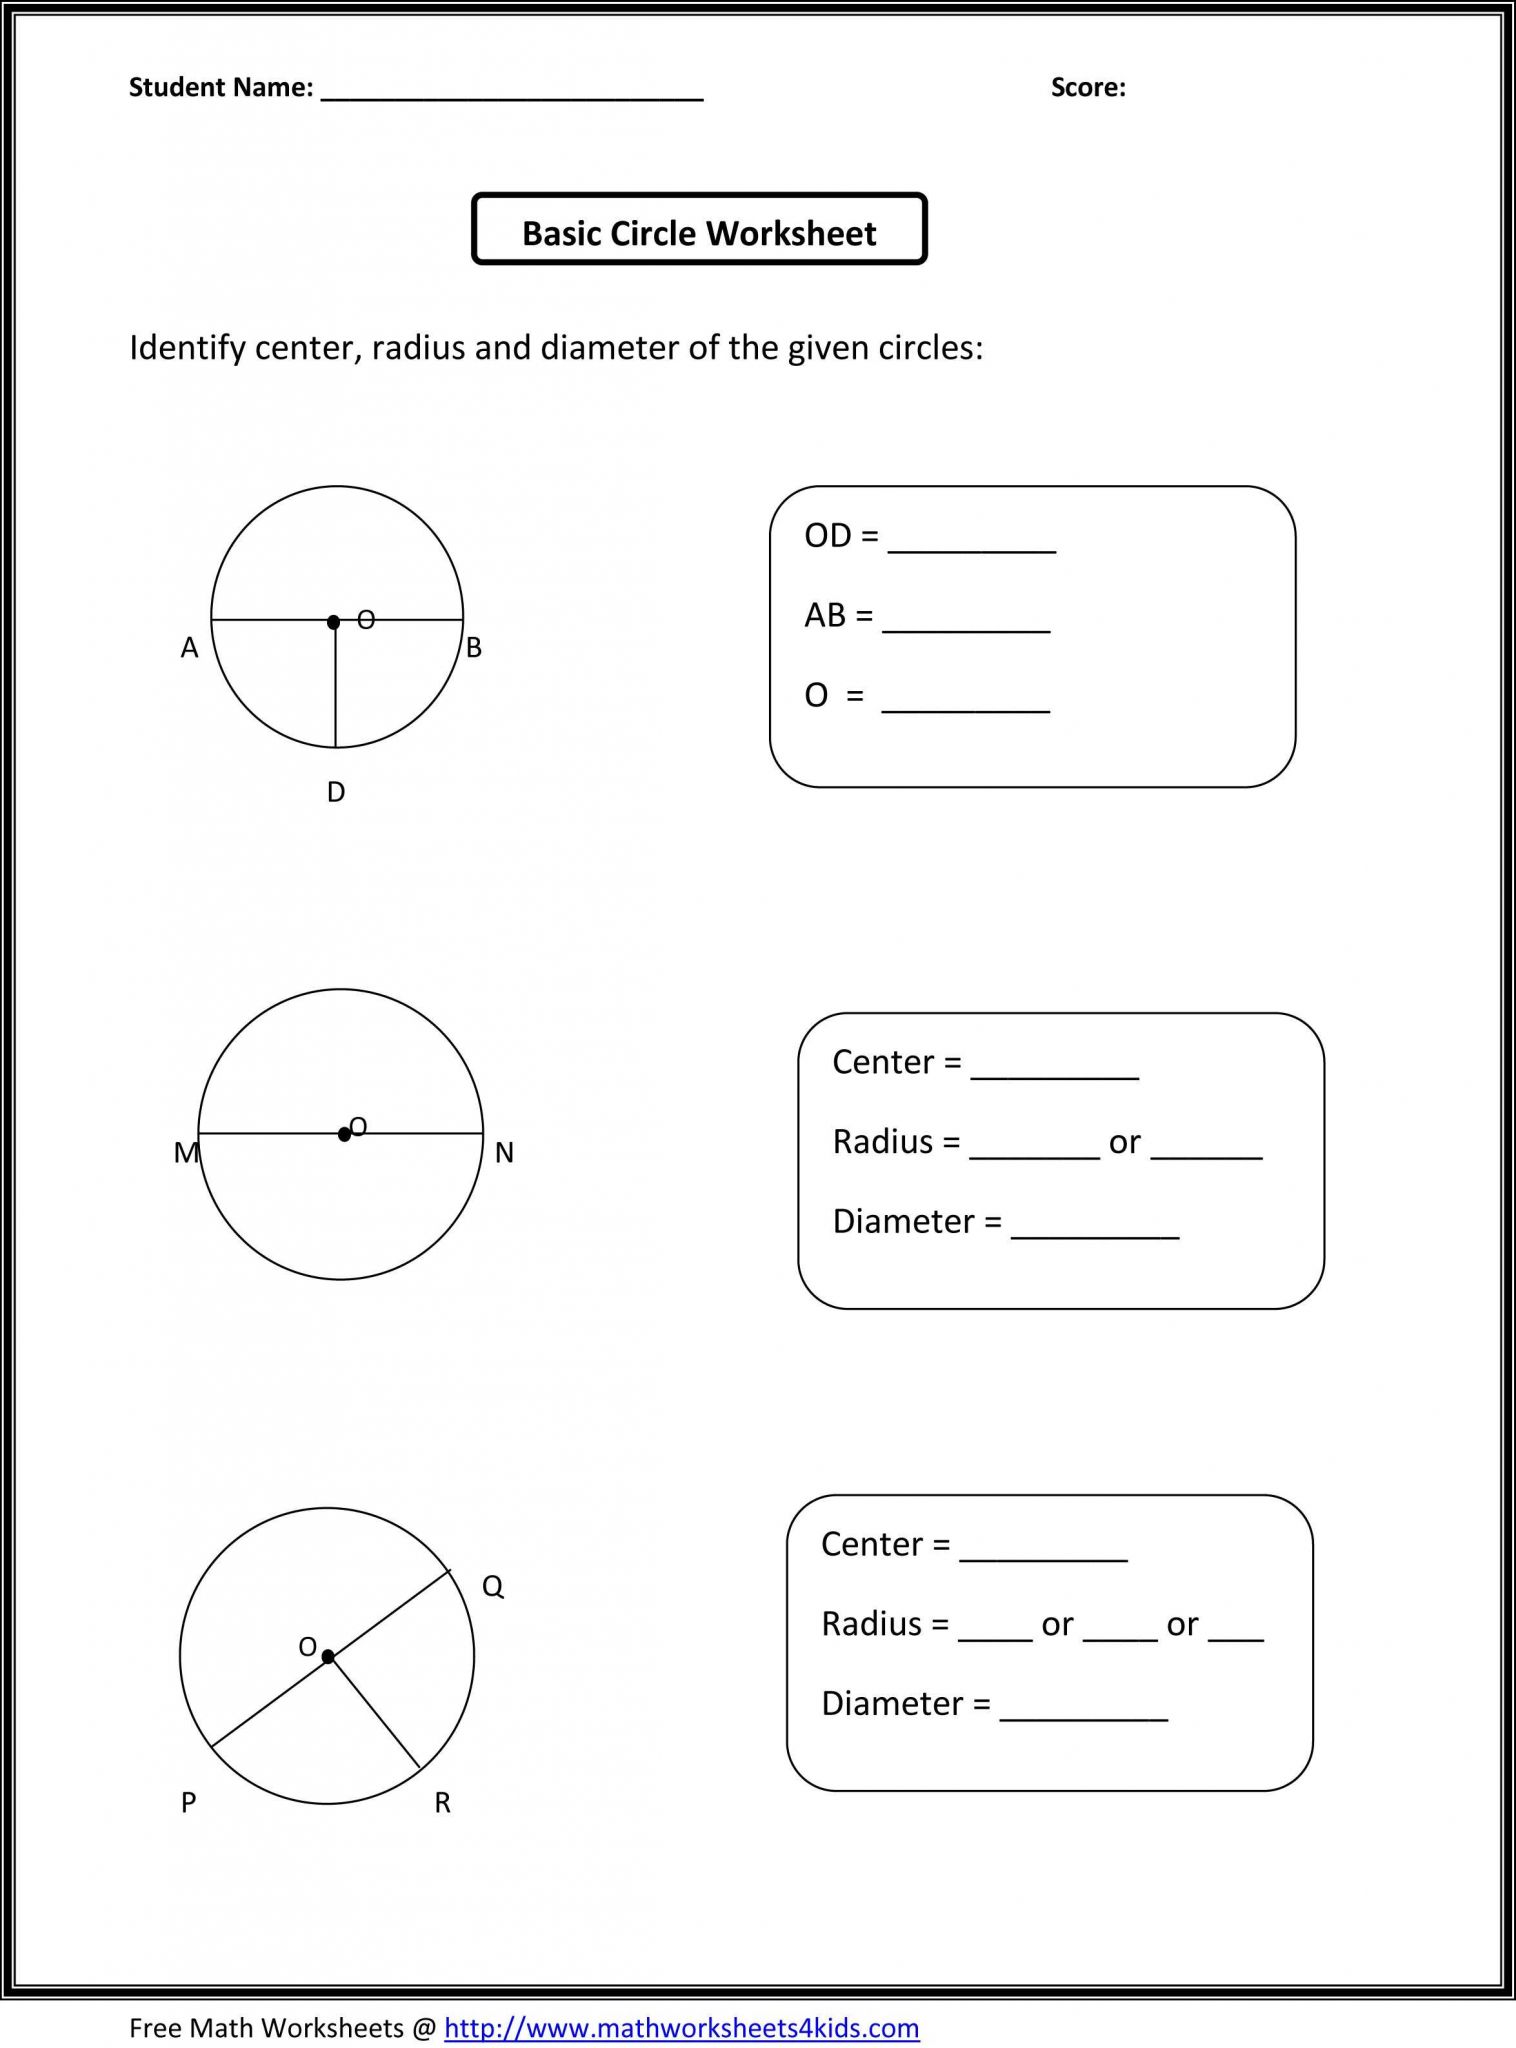 7th Grade Common Core Math Worksheets with Answer Key or 3rd Grade Math Worksheet Mon Core Valid Fractions Fractionsheets